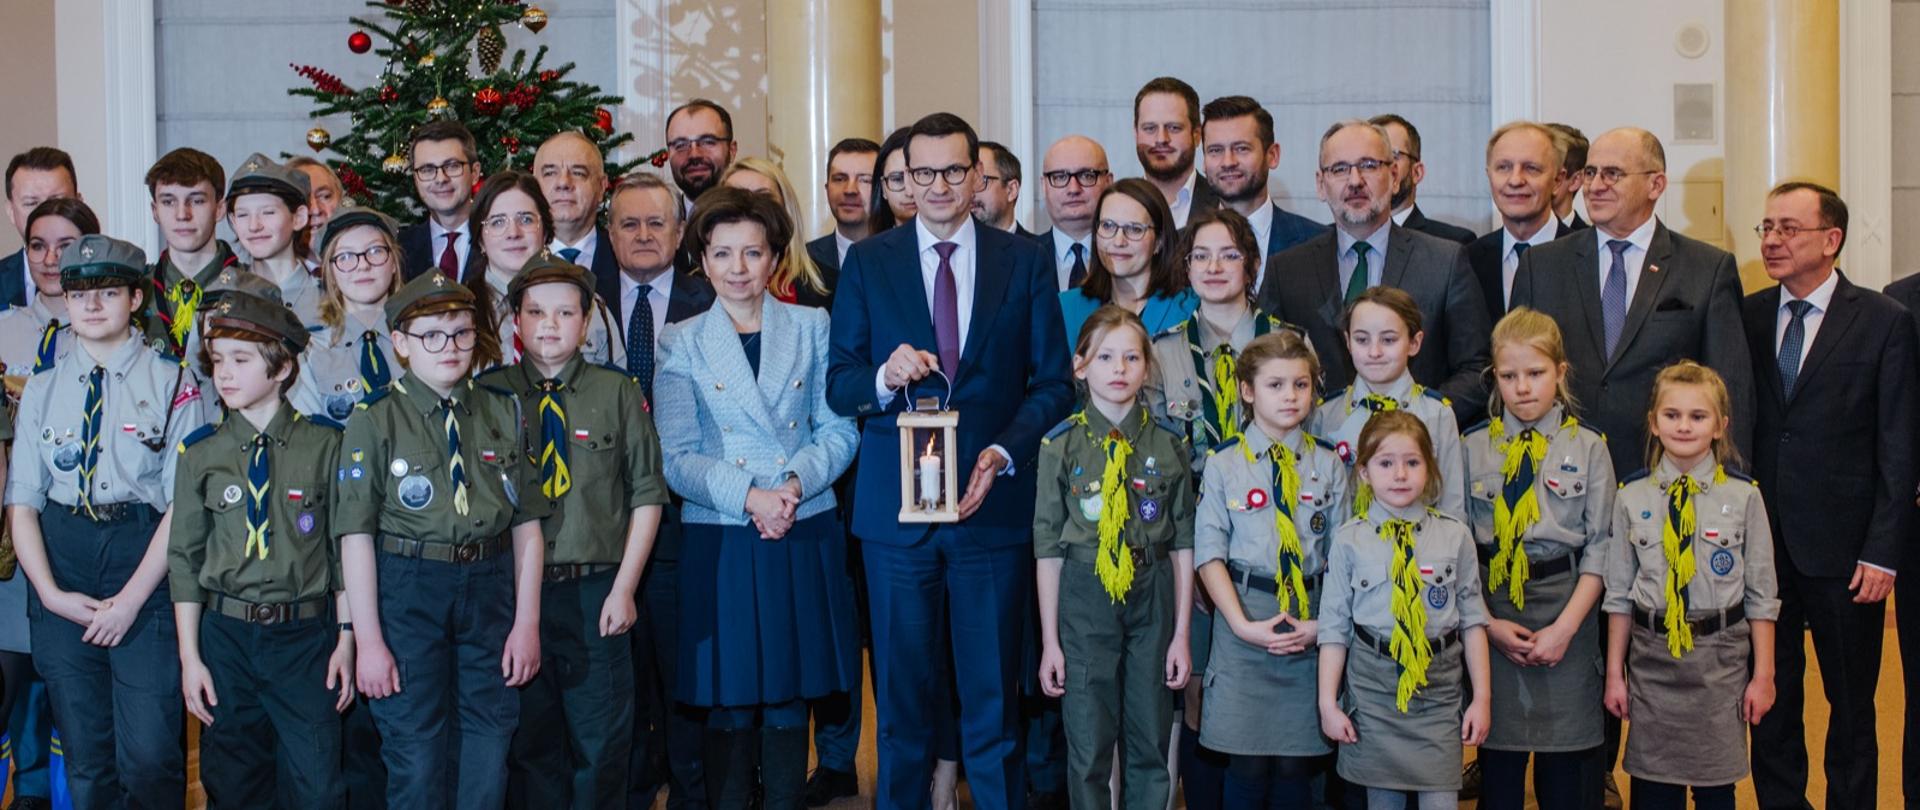 Prime Minister accepts the Peace Light of Bethlehem from scouts The